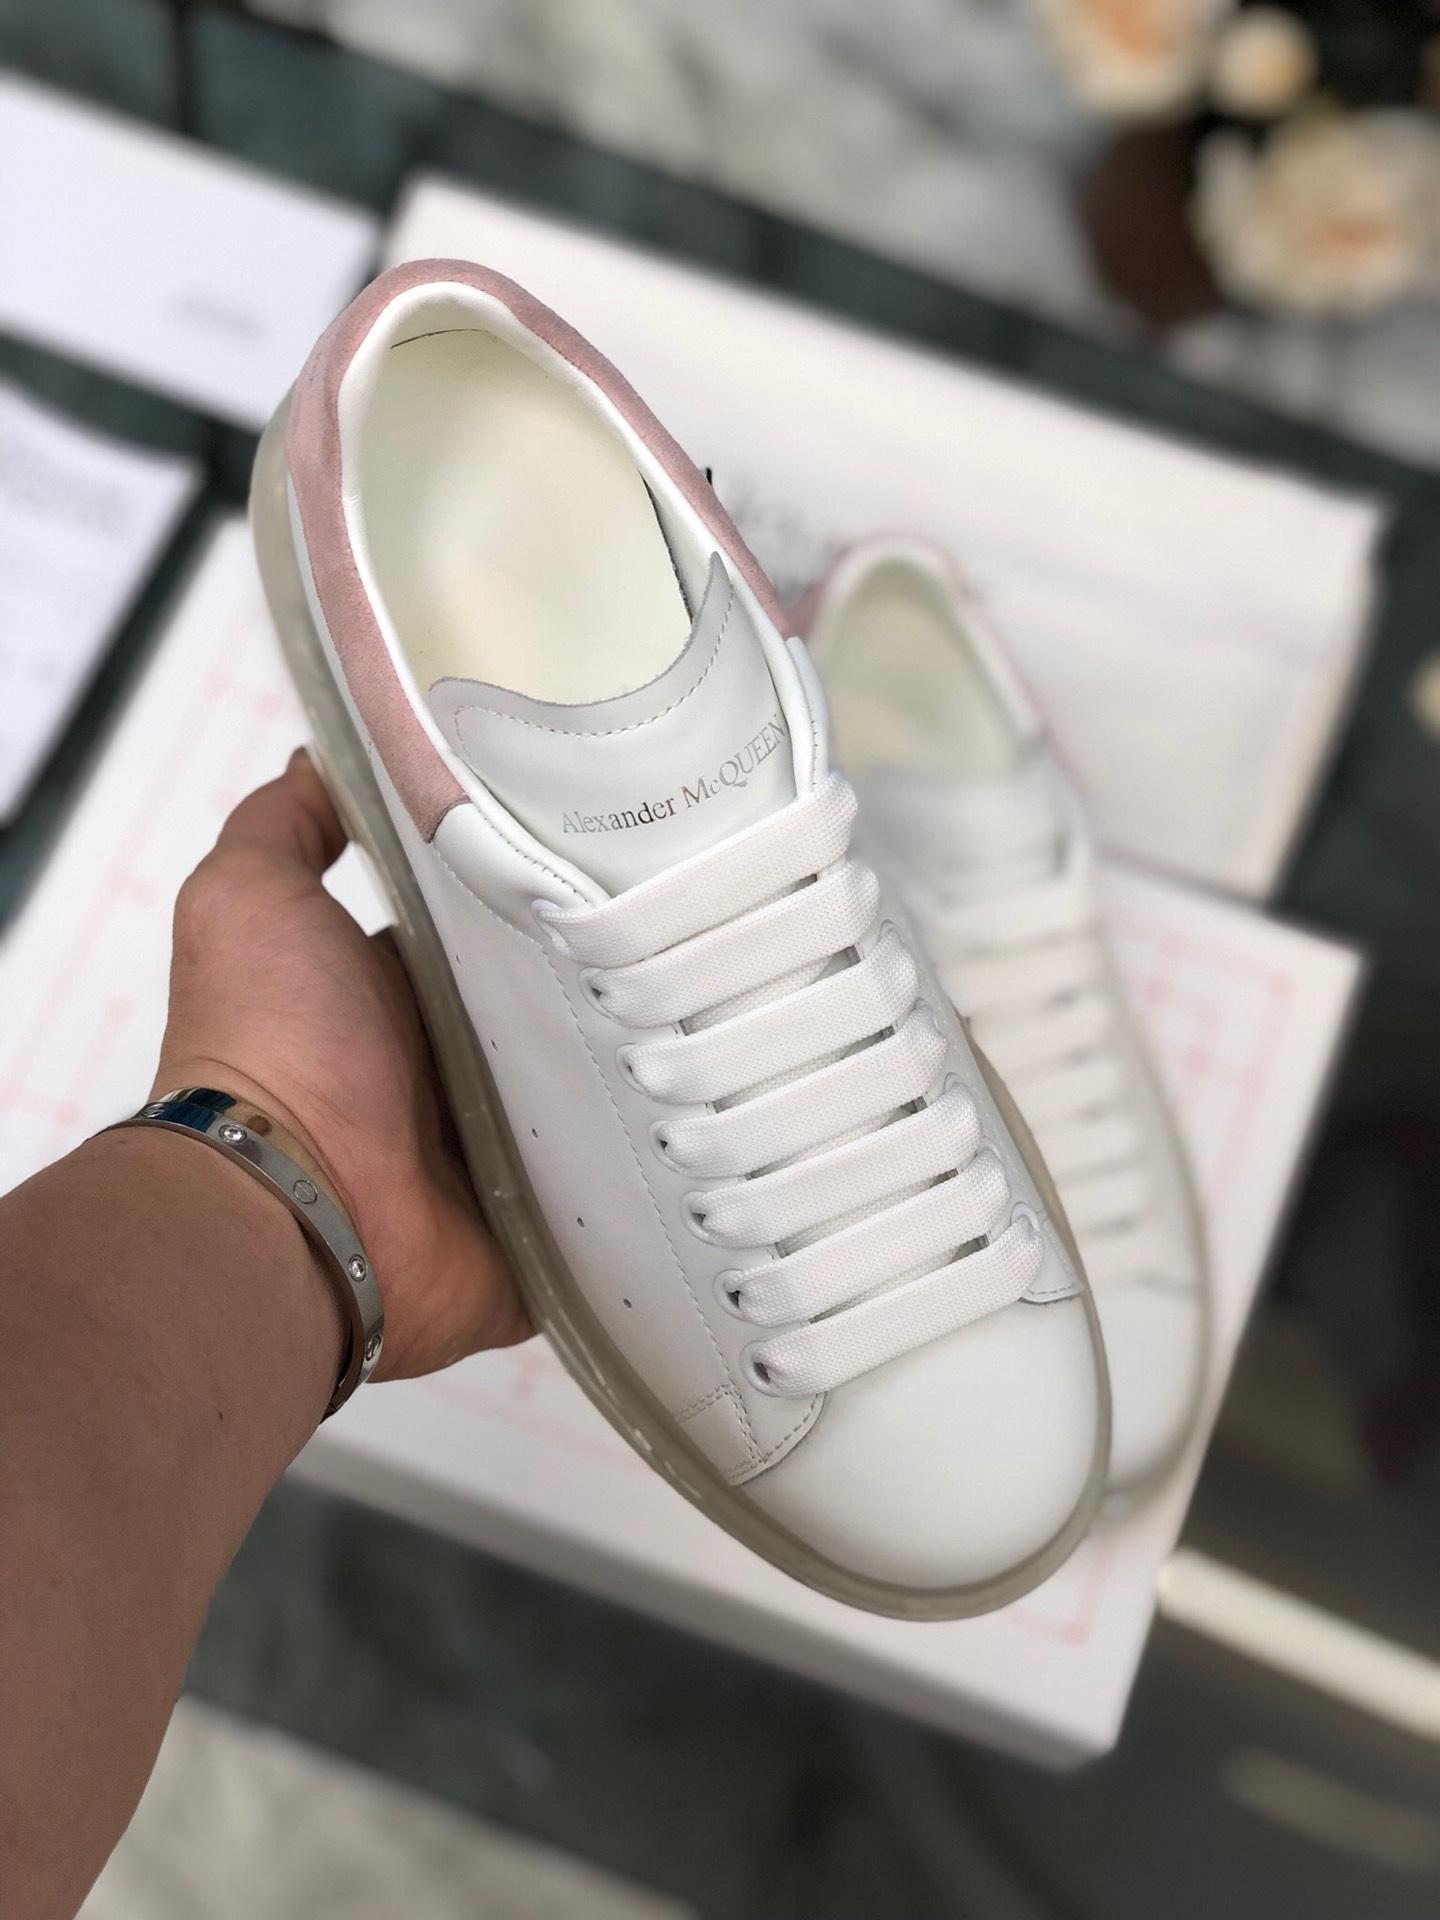 Alexander McQueen Fahion Sneaker White and pink suede heel with transparent sole MS100029